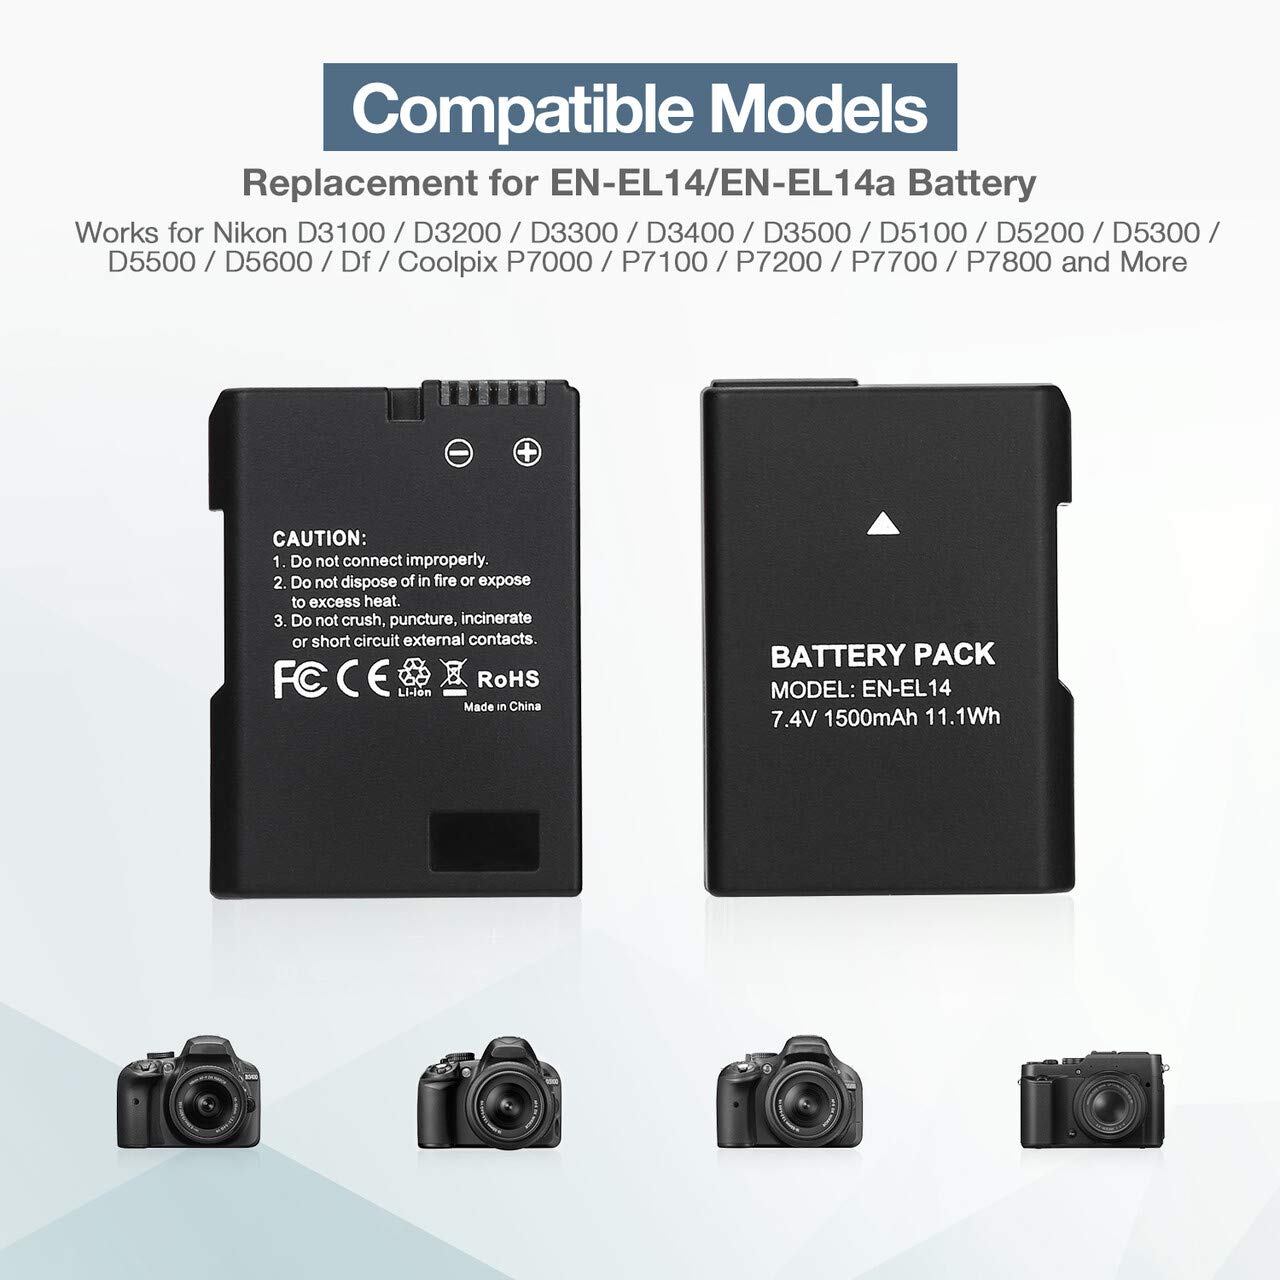 EN-EL14 EN EL14A Battery USB Charger and 2-Pack Rechargeable Batteries Replacement Compatible with Nikon D3100 D3200 D3300 D3400 D3500 D5100 D5200 D5300 D5500 D5600 DF Coolpix P7000 P7100 P7700 P7800